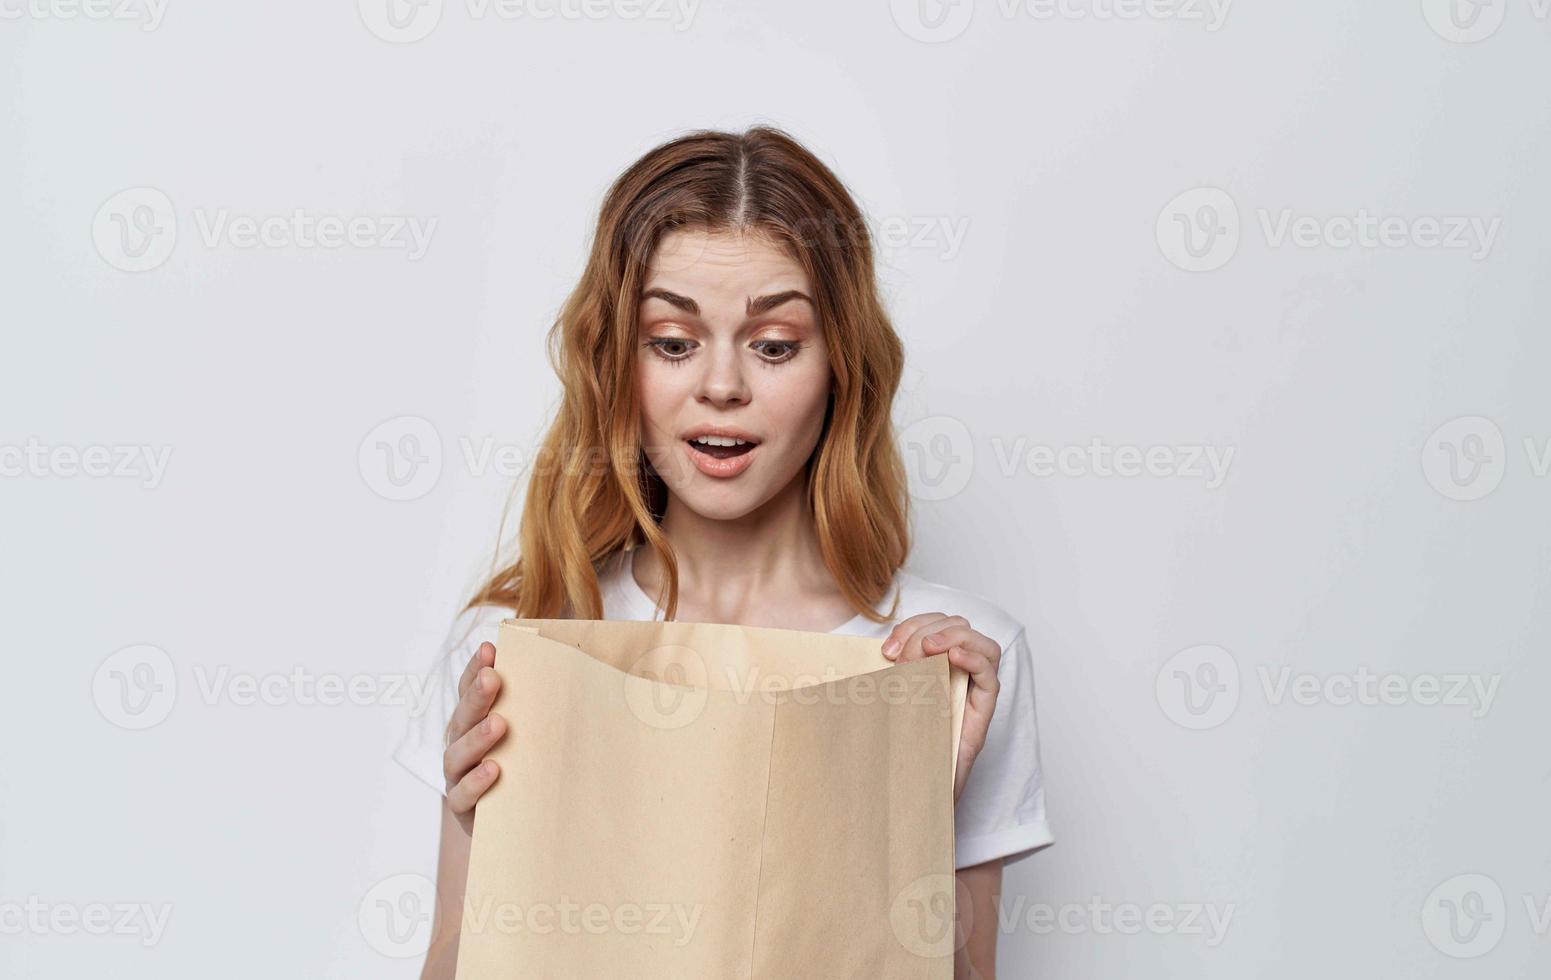 woman in a white t-shirt with a package in her hands shopping photo